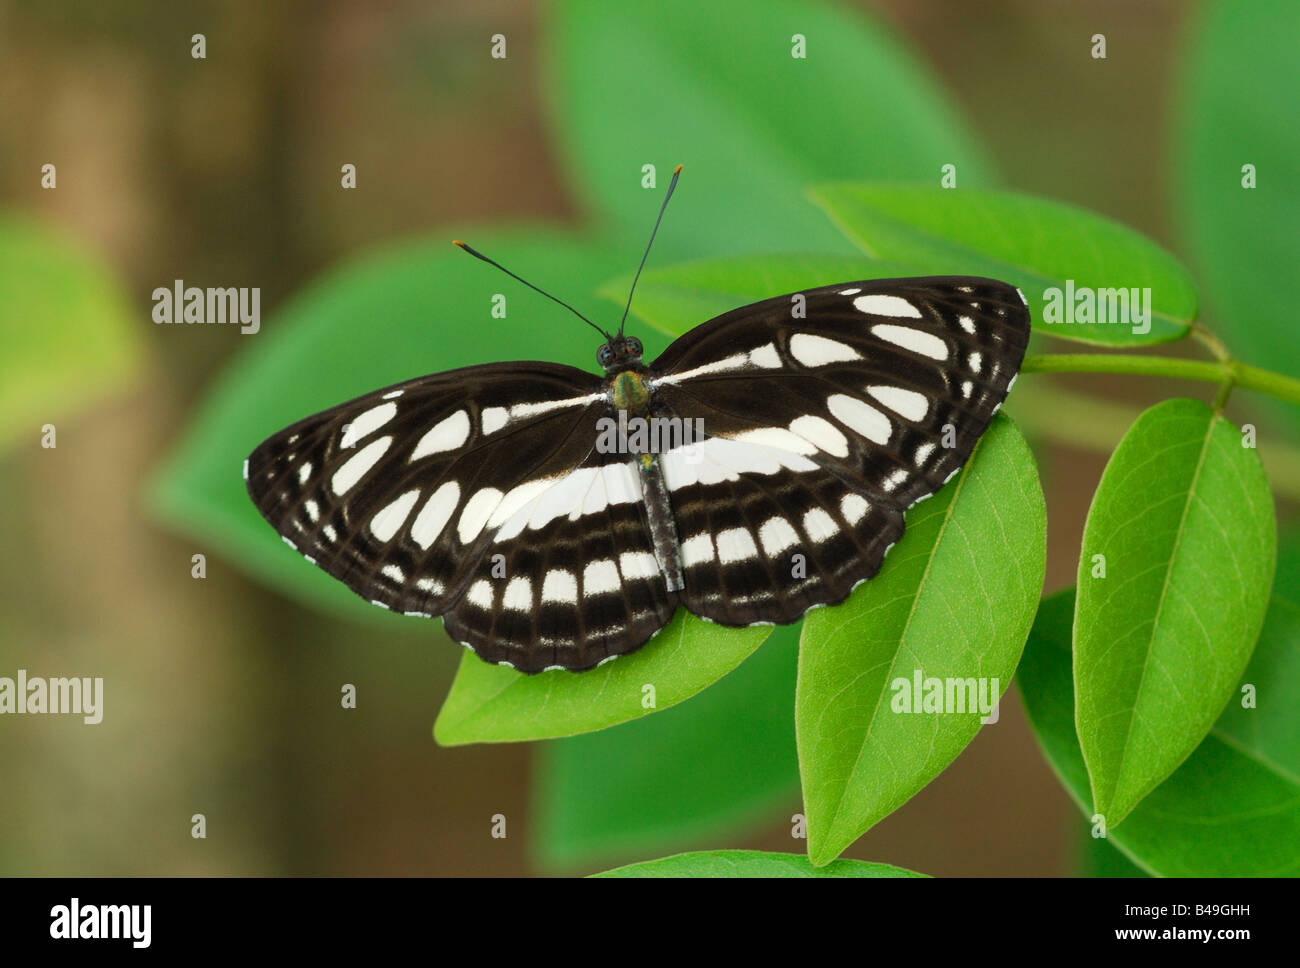 Common Sailor butterfly (Neptis hylas) in the rainforest of the Sinharaja Forest National Park, Sri Lanka Stock Photo